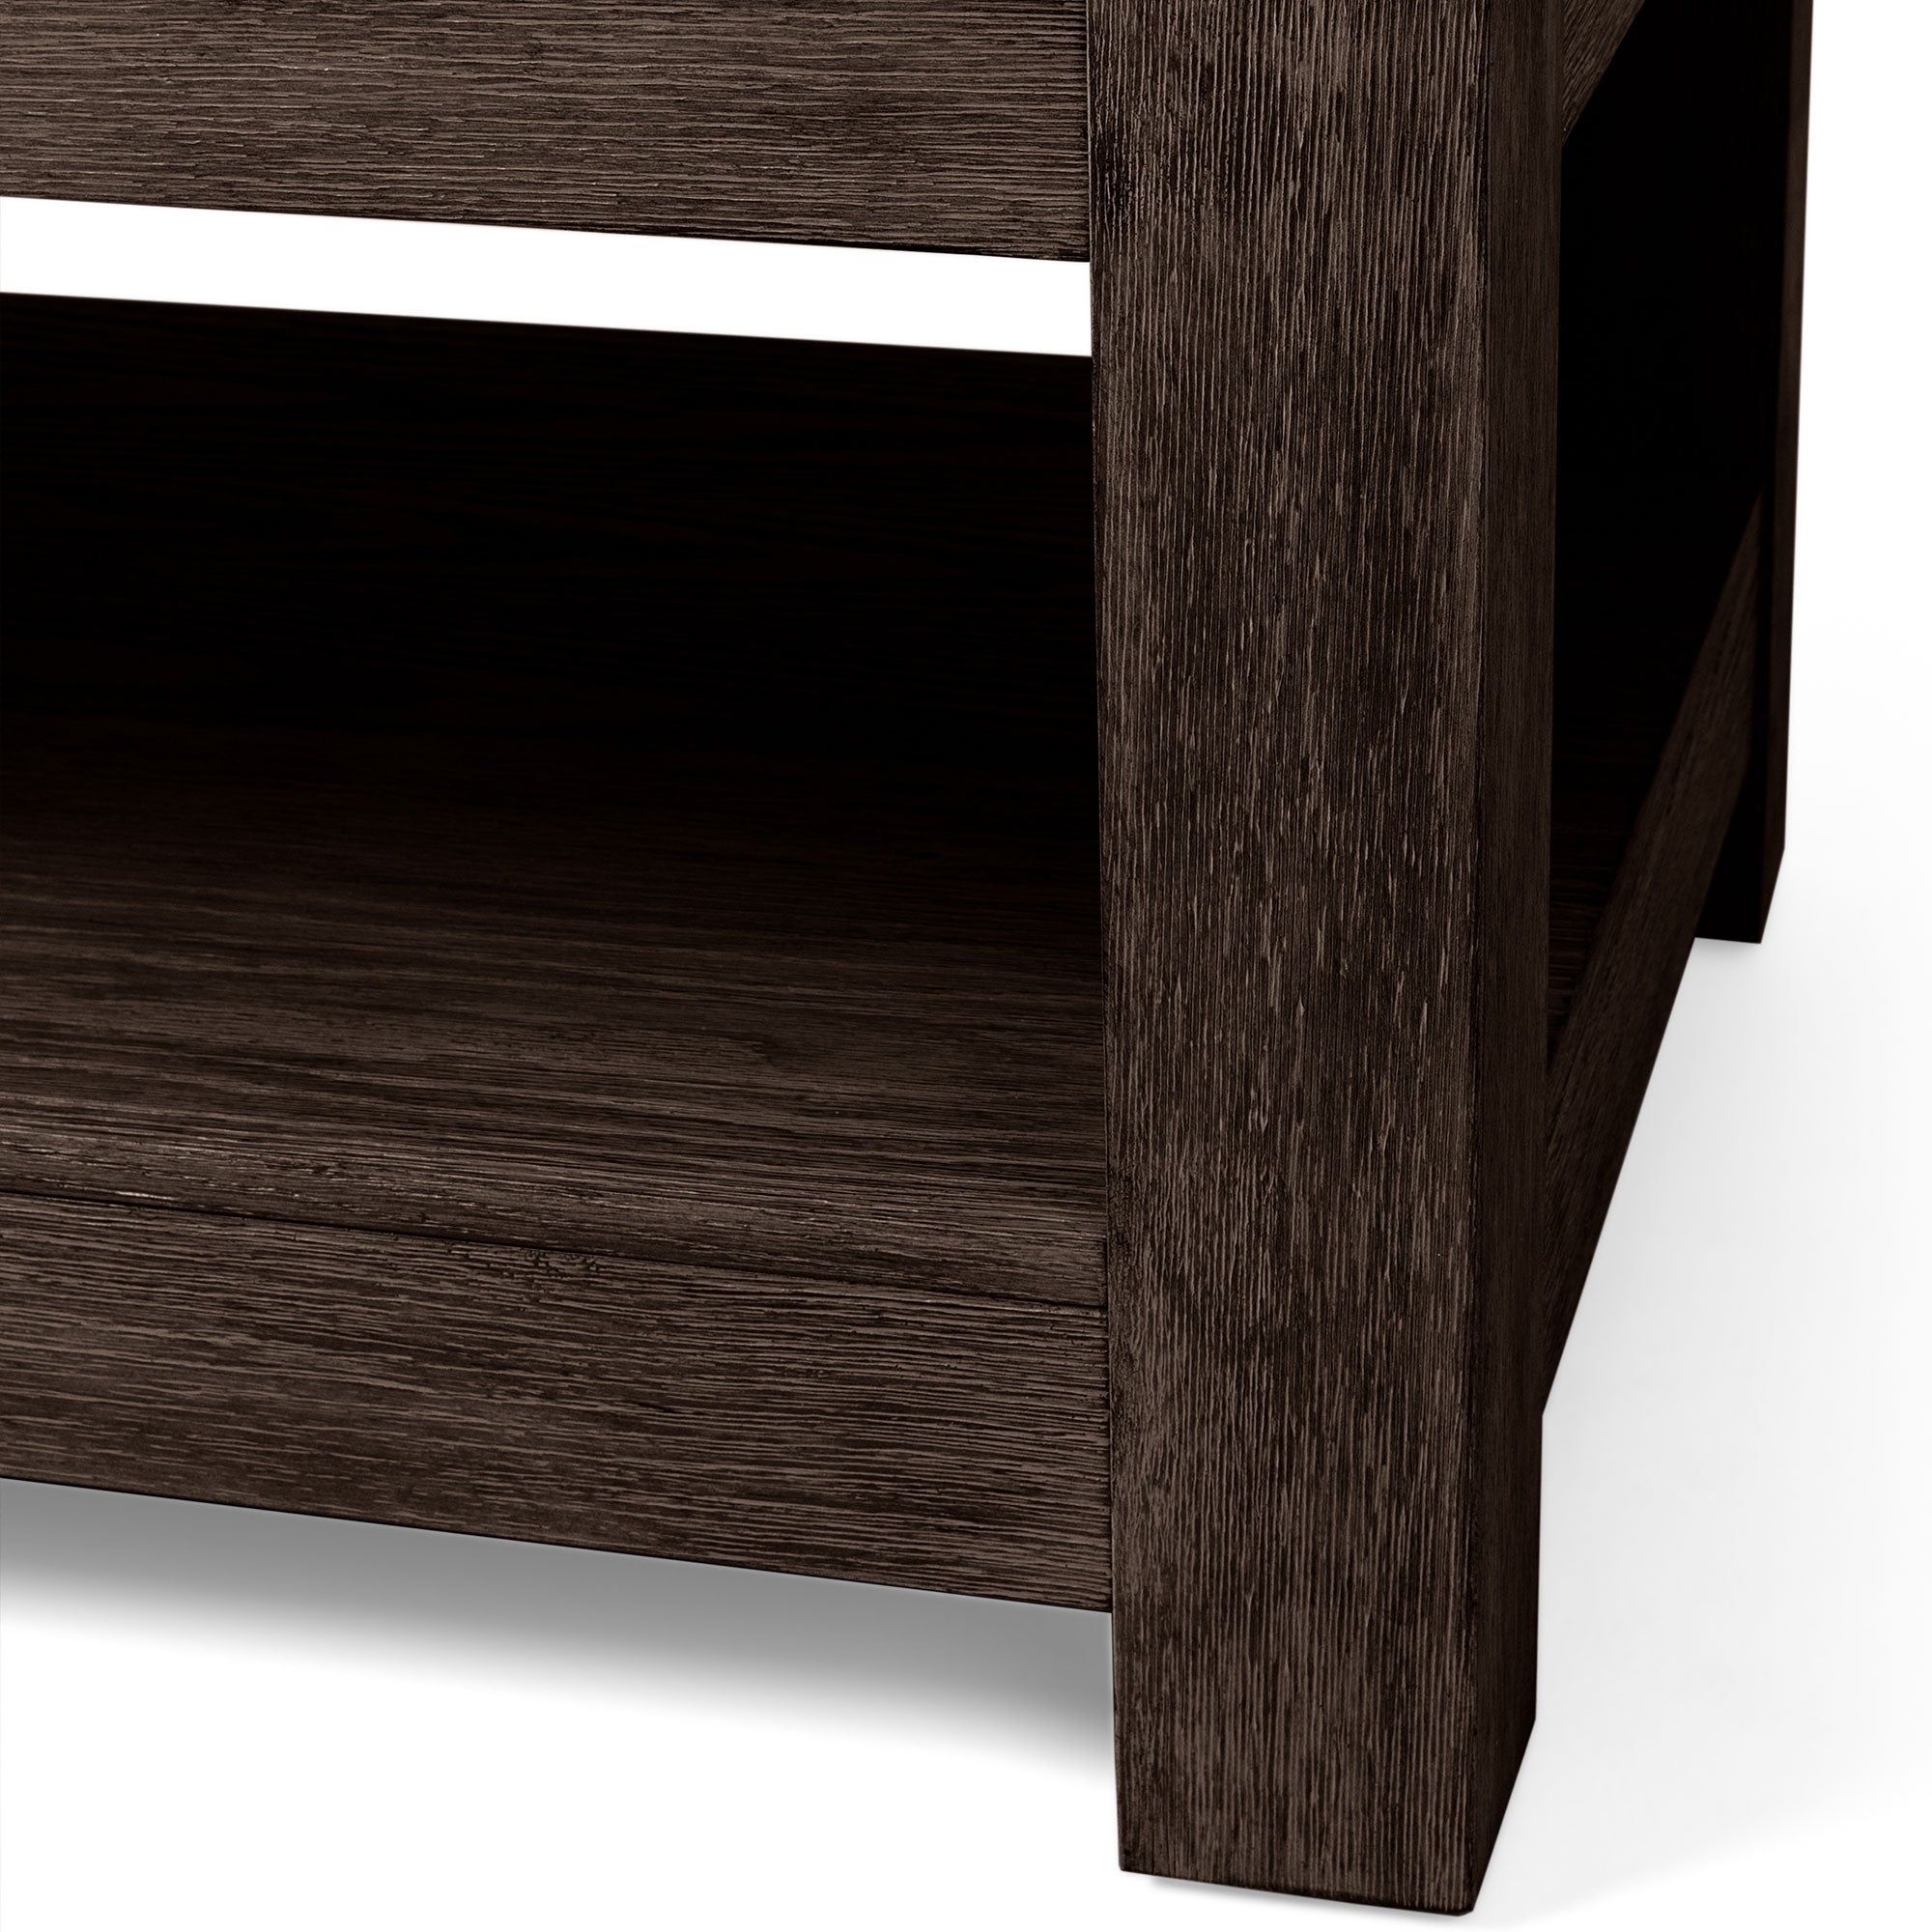 Paulo Wooden Coffee Table in Weathered Brown Finish in Accent Tables by Maven Lane